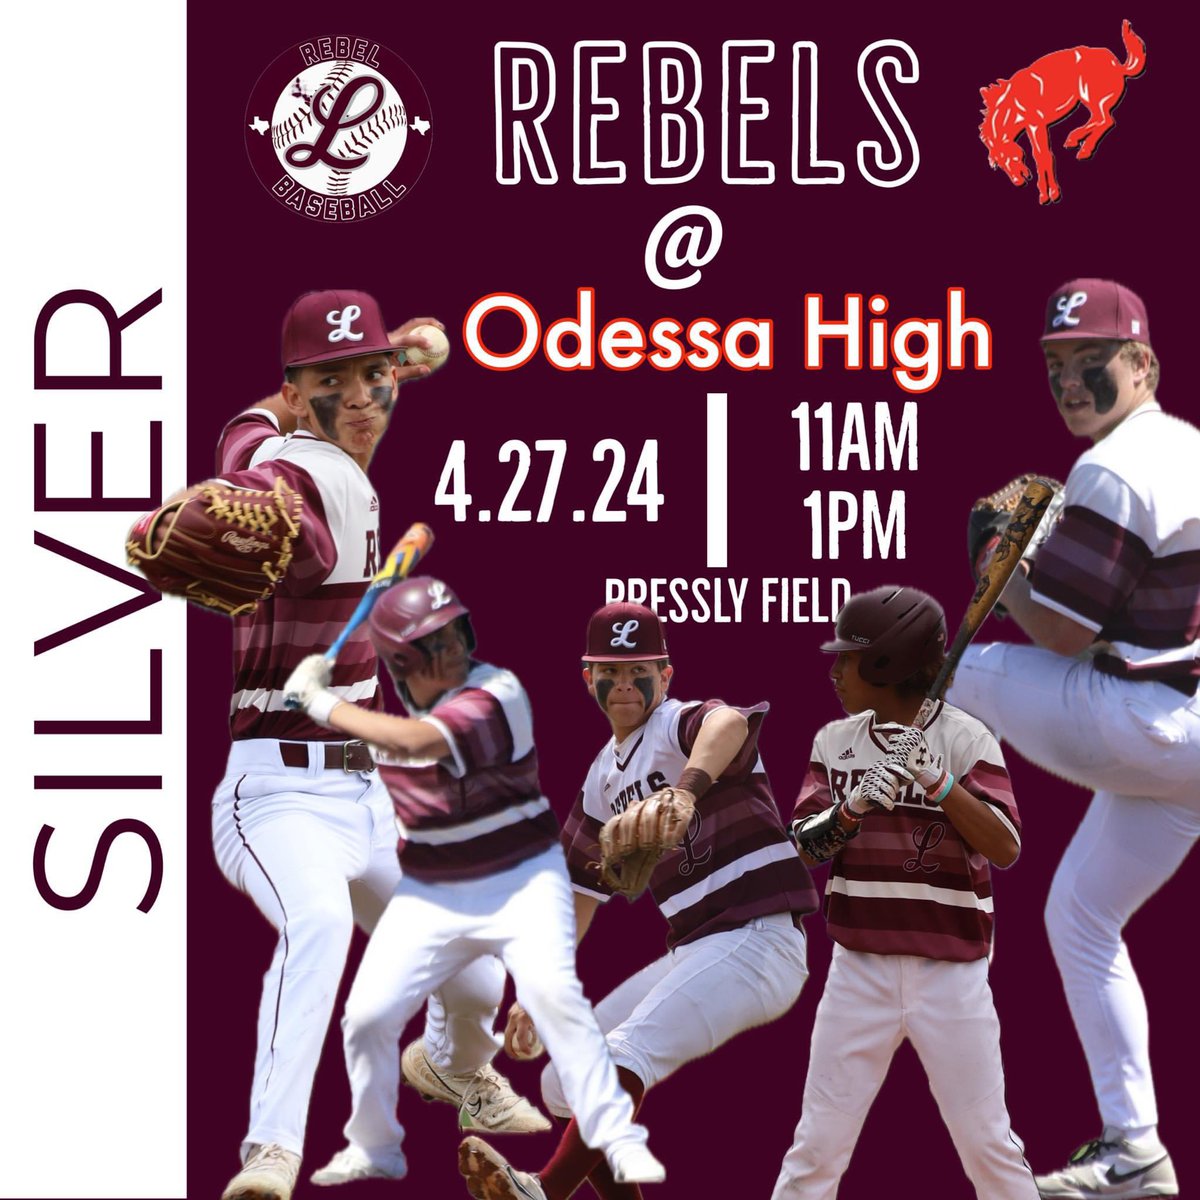 Our JV teams will wrap up their seasons today and tomorrow with doubleheaders against the OHS Bronchos. Maroon: 4.26.24 | 4:30pm | Ernie Johnson Silver: 4.27.24 | 11:00am | Pressly Field Let’s finish strong, Rebels!! #2024RebelBaseball